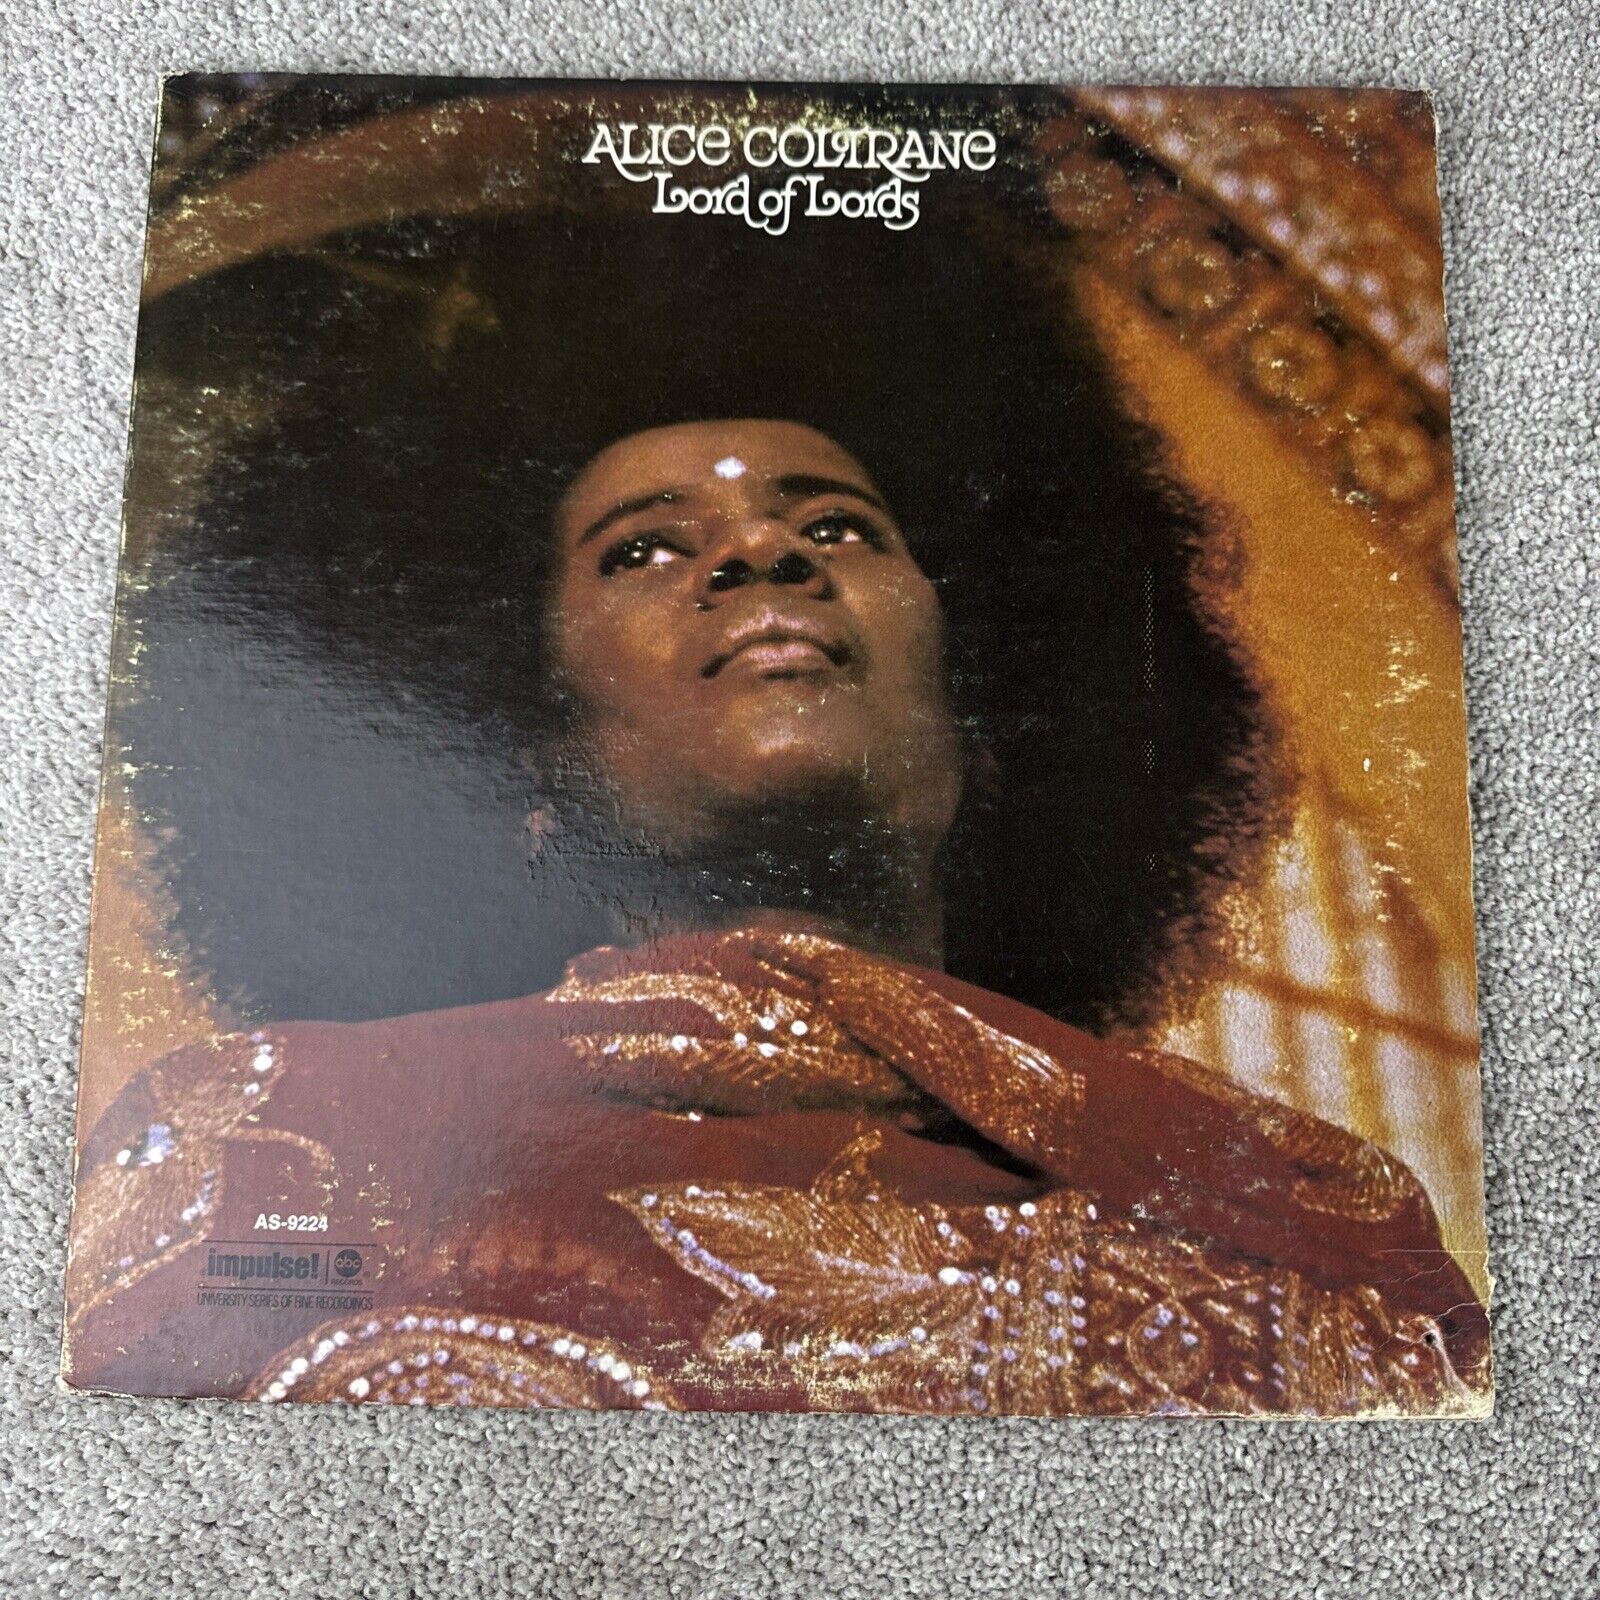 ALICE COLTRANE Lord Of Lords LP IMPULSE AS-9224 US 1972 JAZZ Charlie Haden